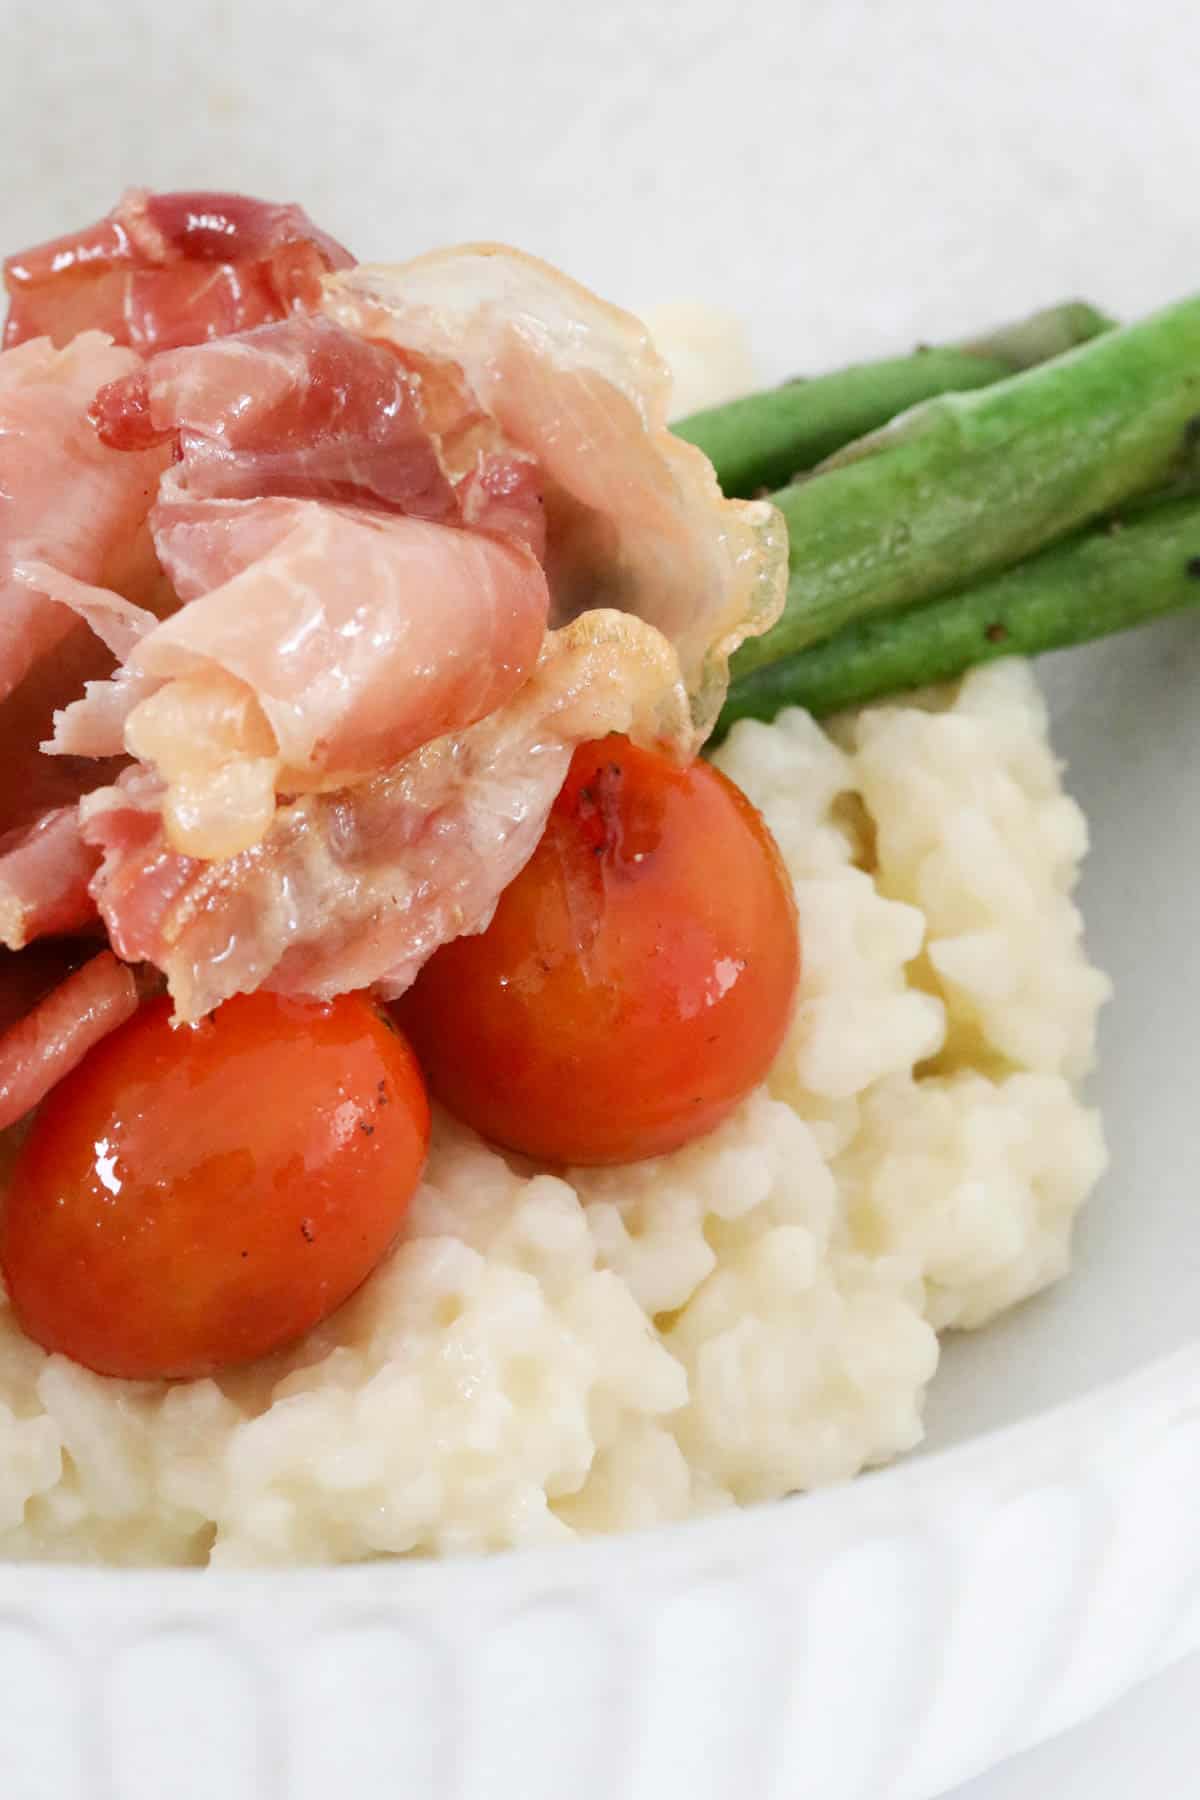 Crispy prosciutto and grilled veggies on top of risotto.